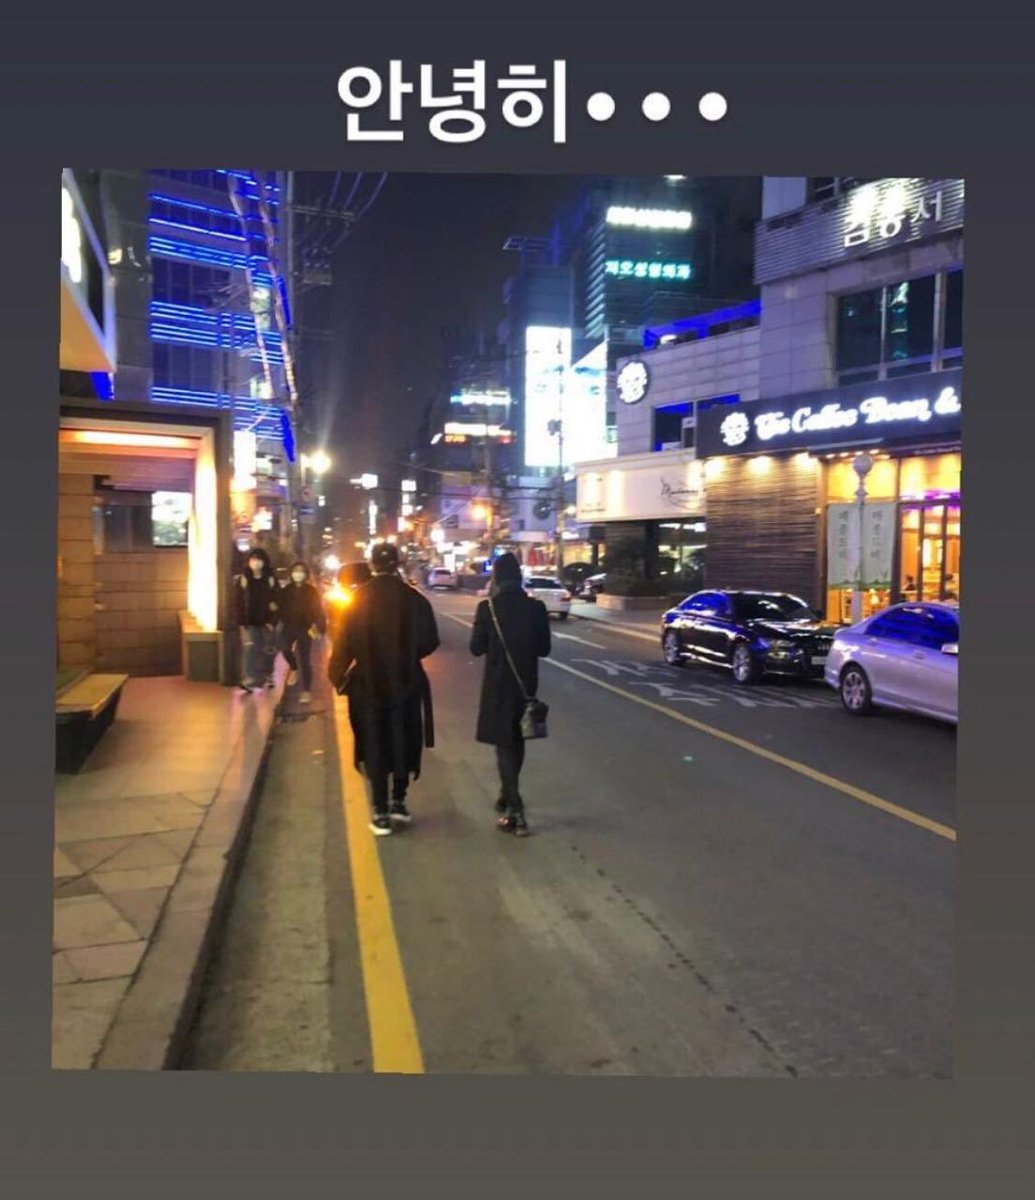 18. On March 3rd, Ong Seongwu and Jimin were spotted hanging out together. Based on the picture seems like they went out to watch a movie in CGV Apgujeong, Gangnam?red caption: 'guys i saw BTS. (got a) handshake hehe'